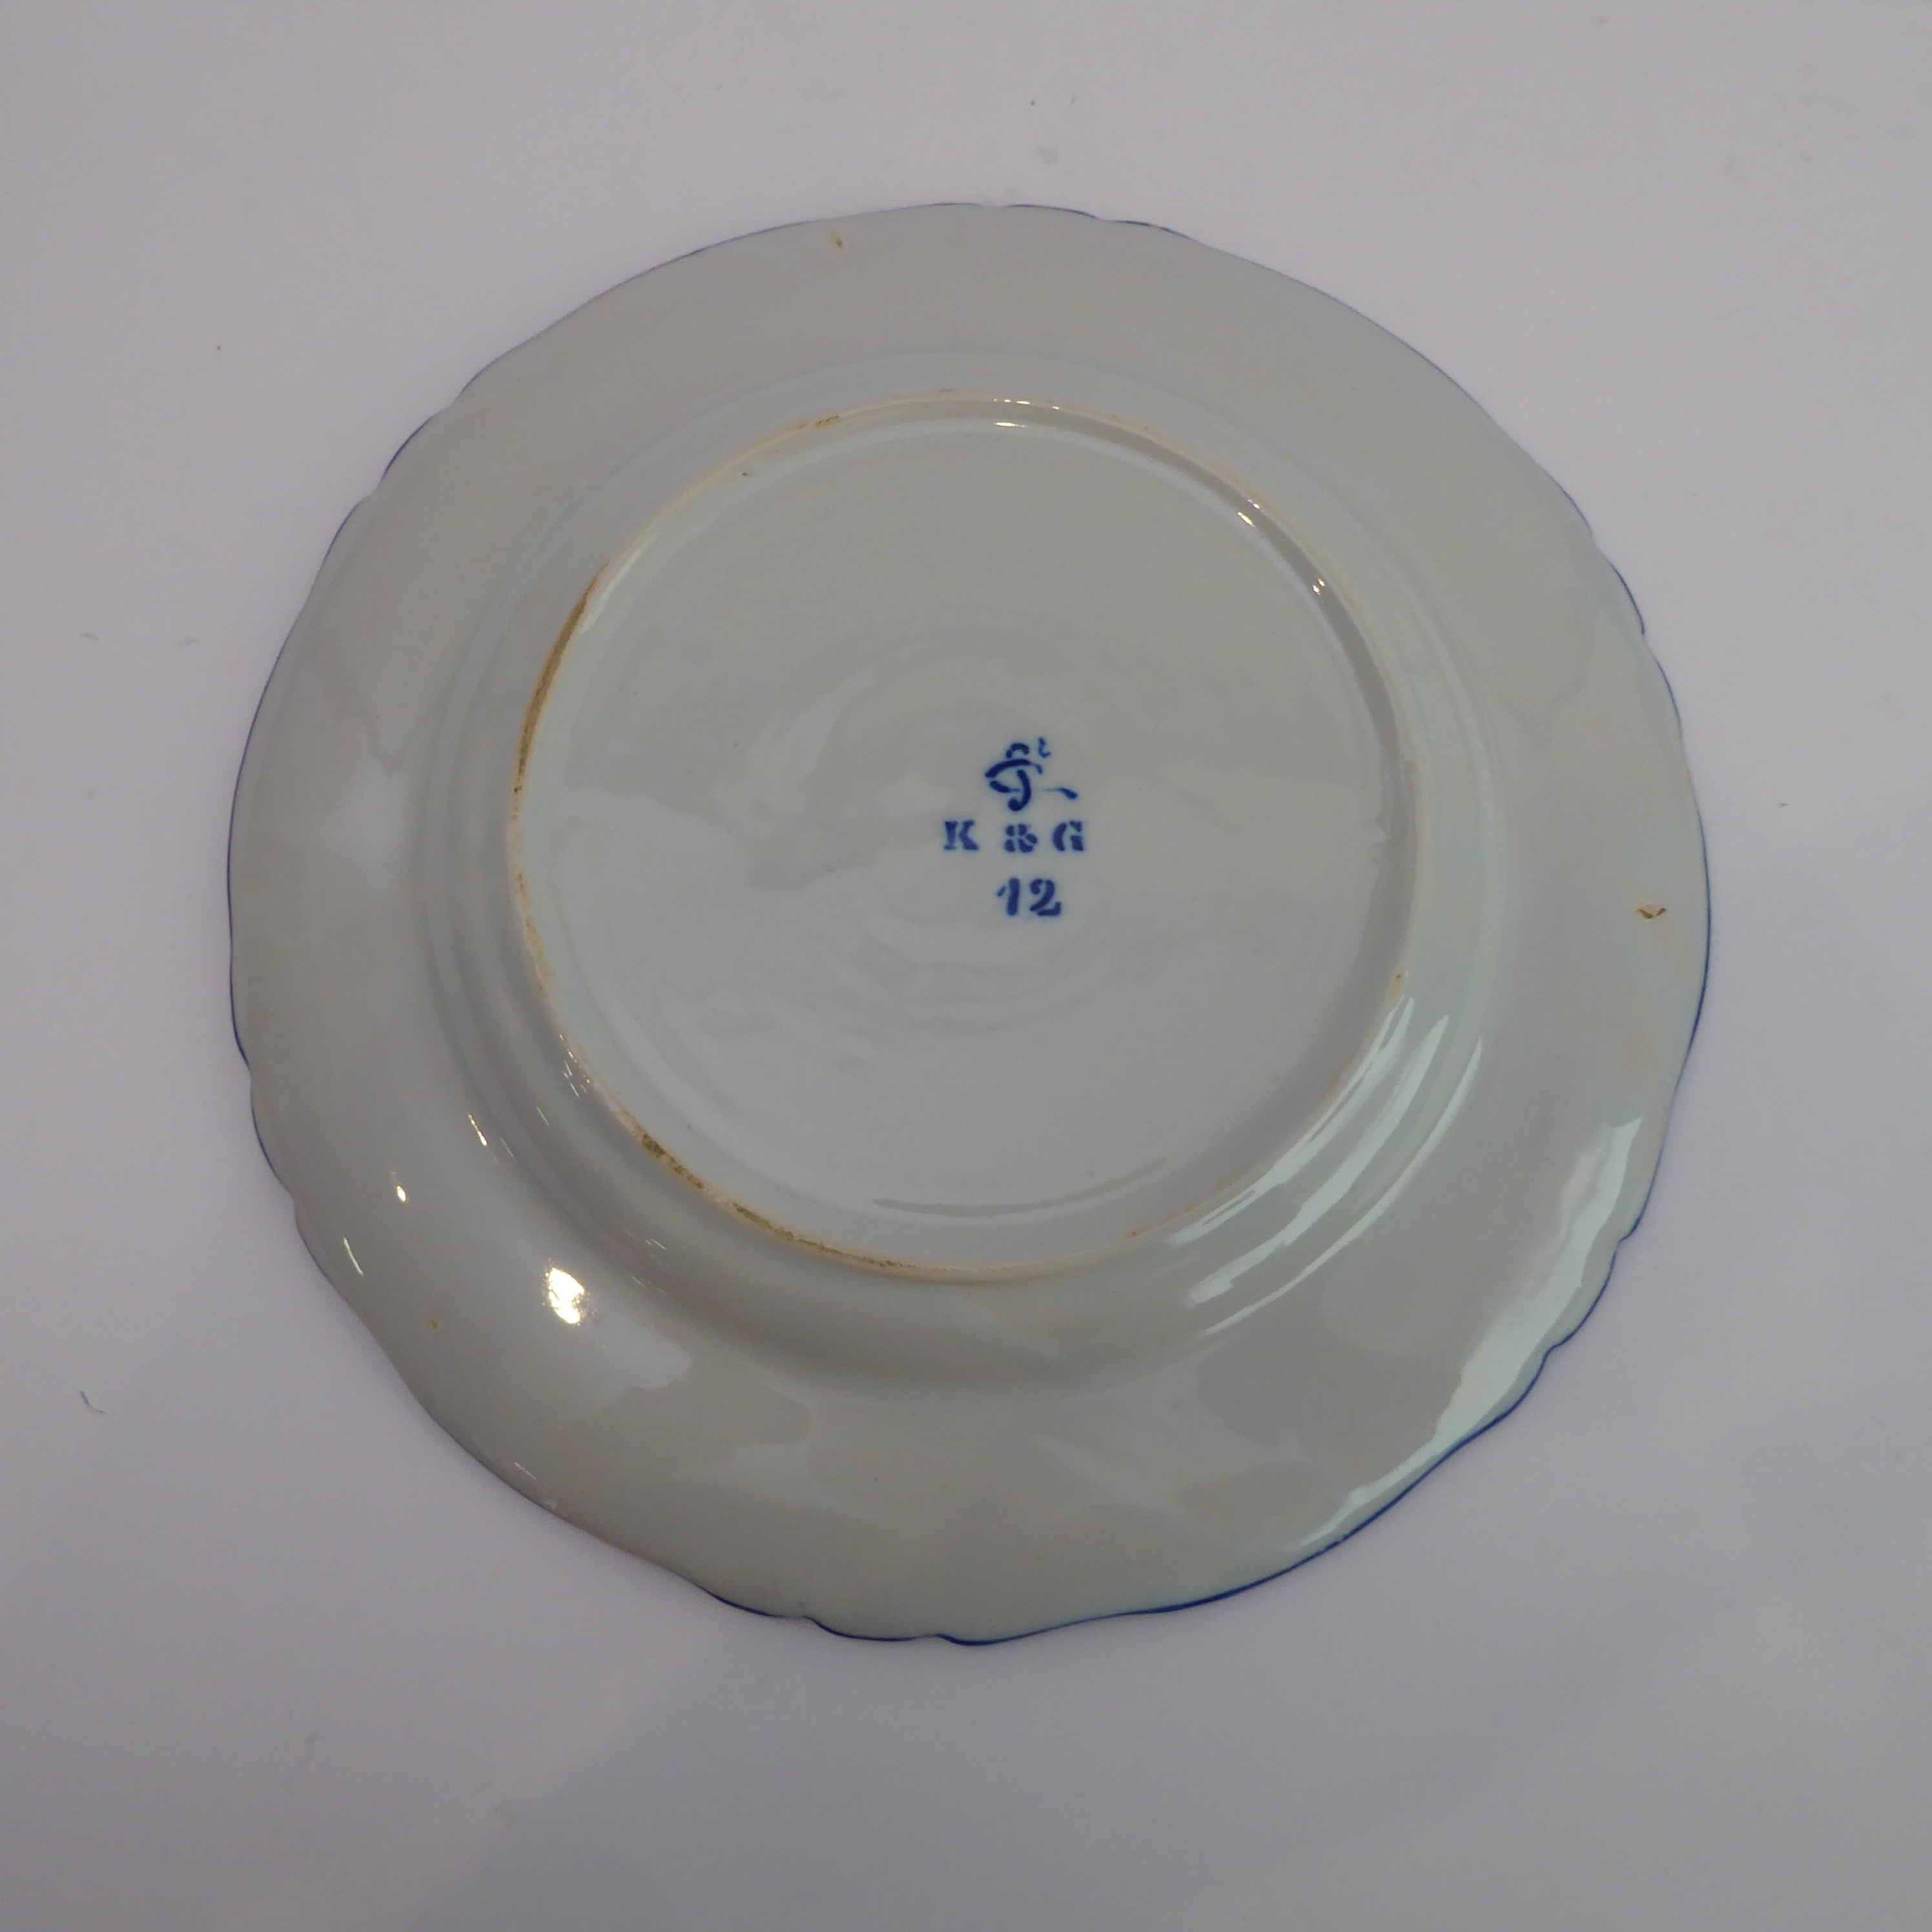 A set of eleven 19th century faience plates by Keller & Guerin at Luneville (early marks). (The - Image 15 of 17